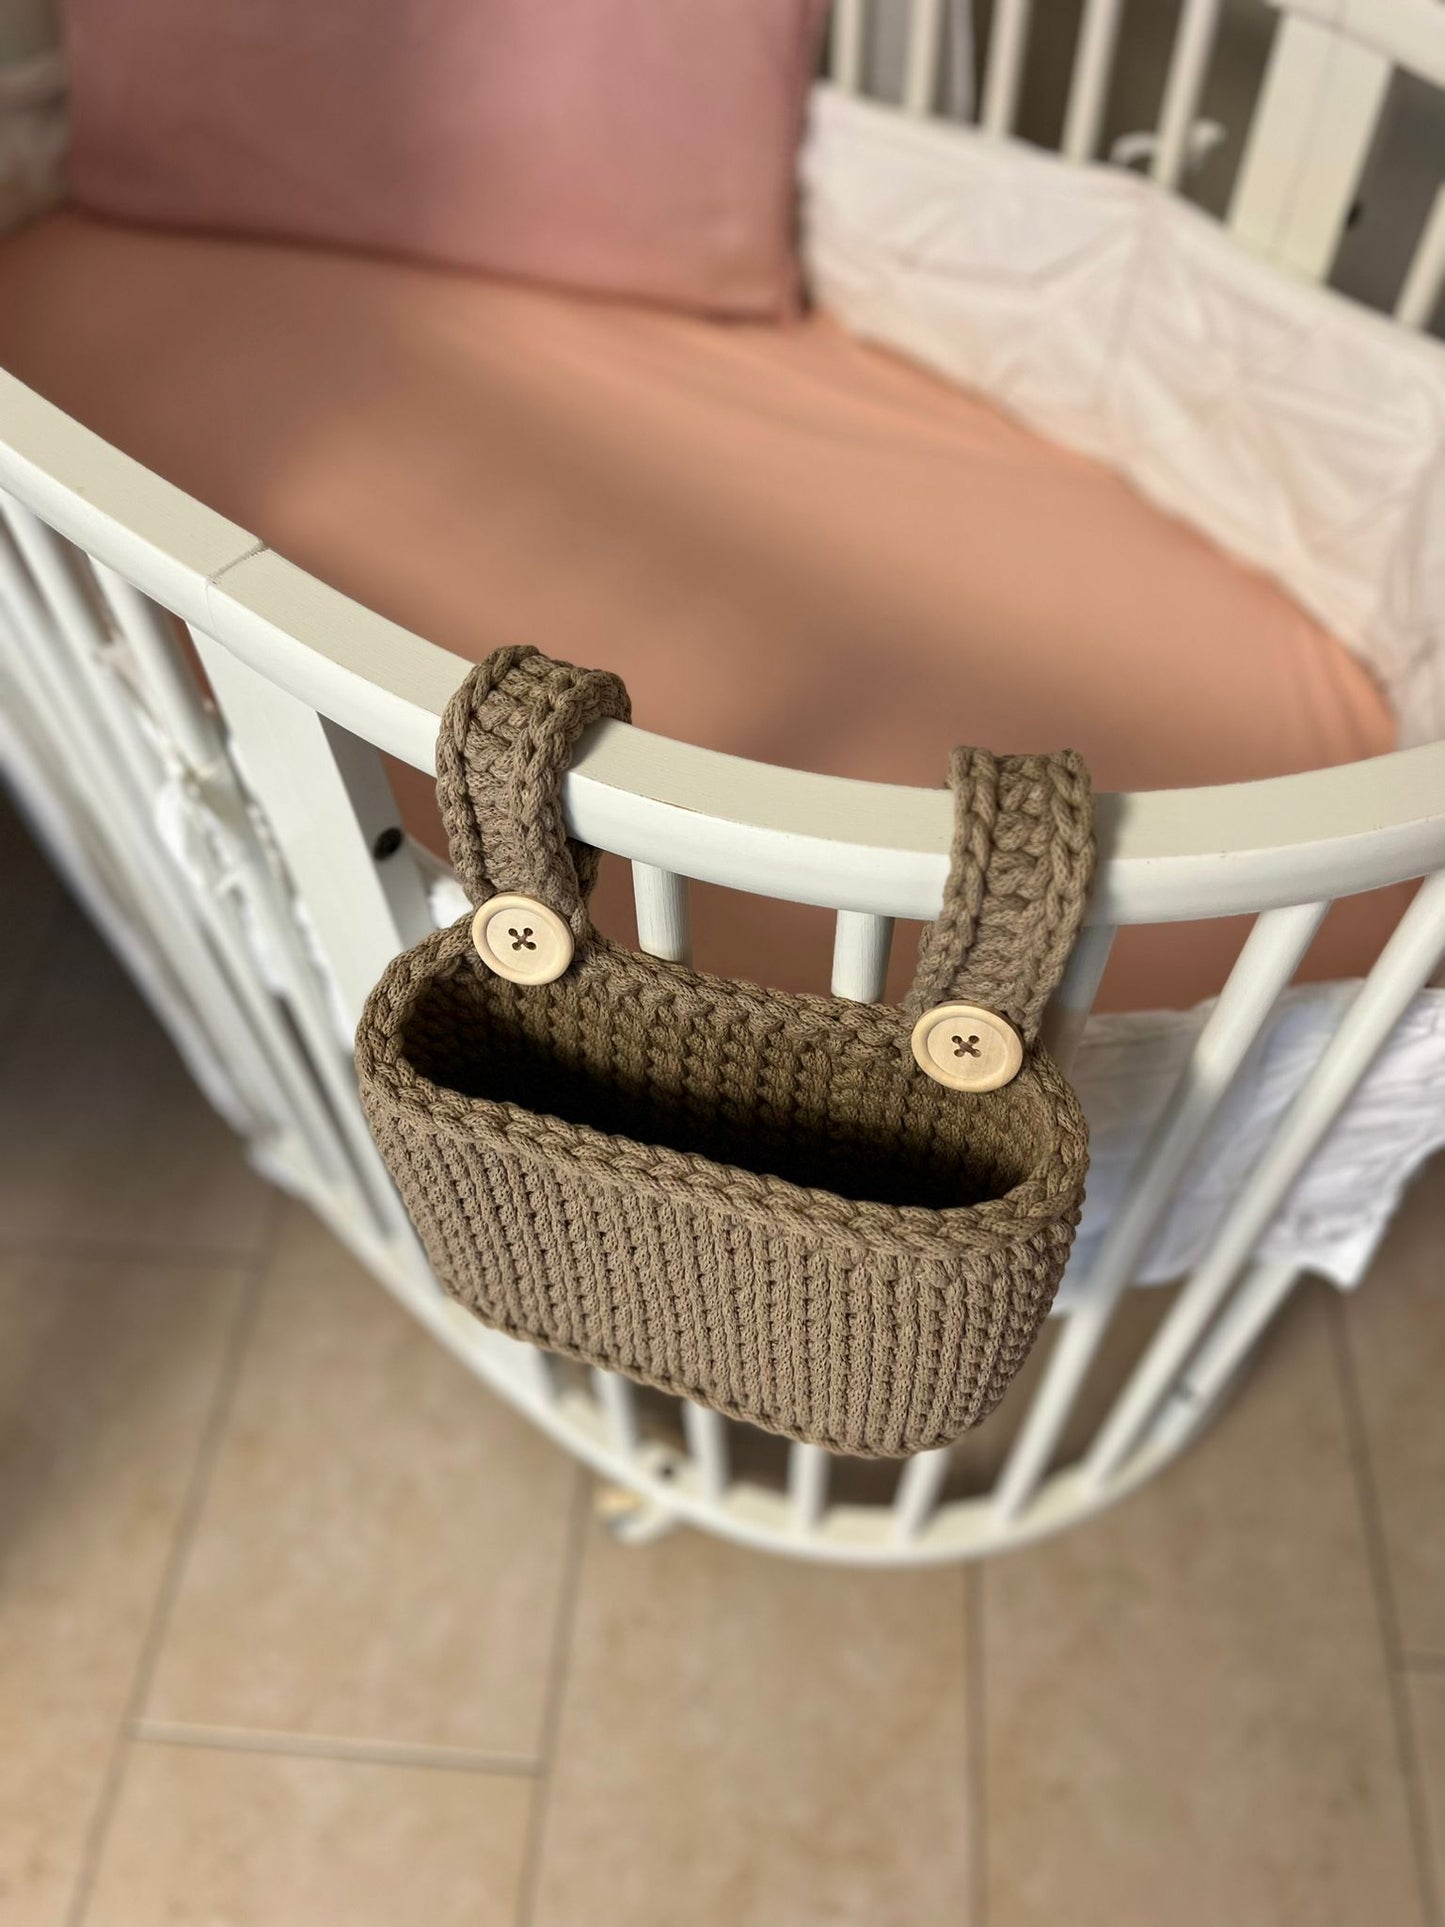 Hanging basket for the baby bed